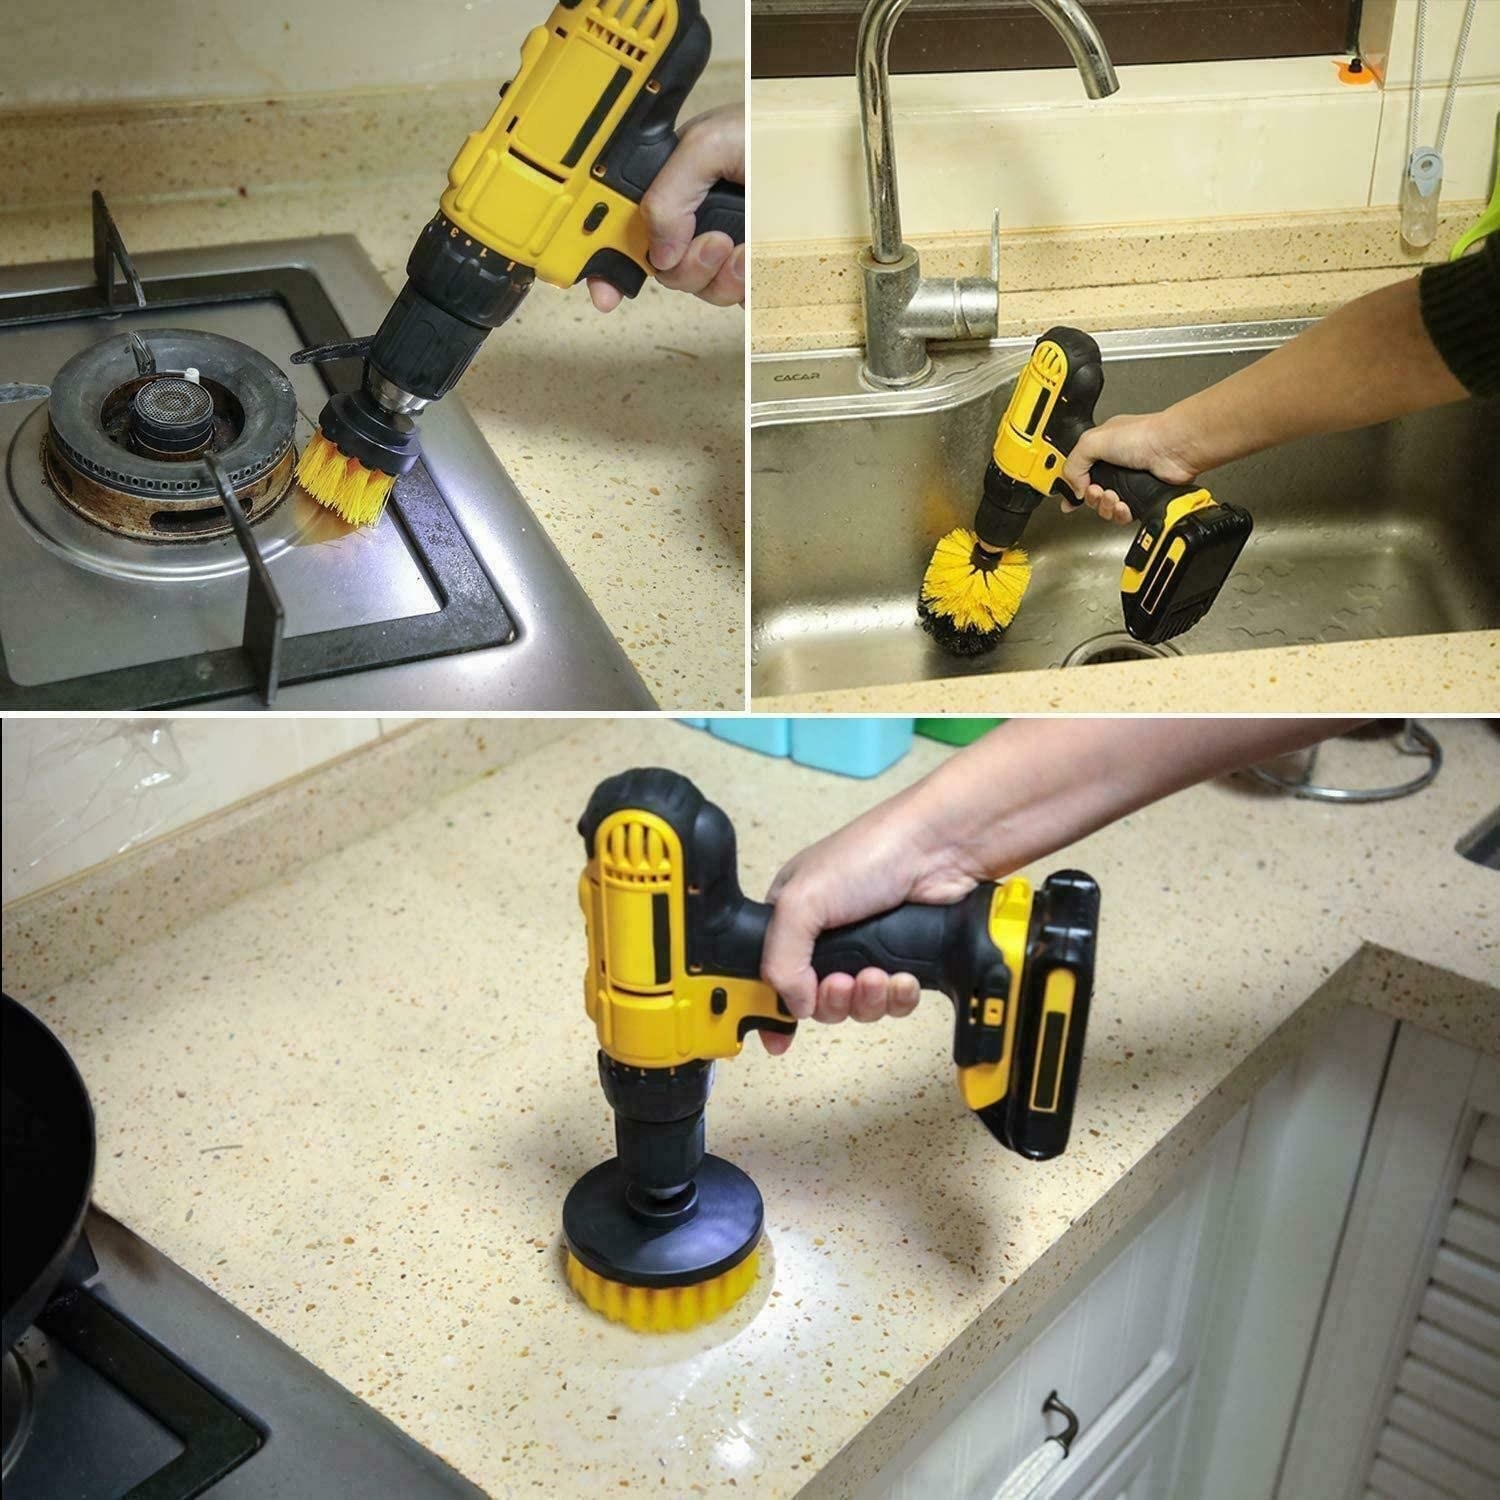 A person using the brush heads to clean various parts of their home